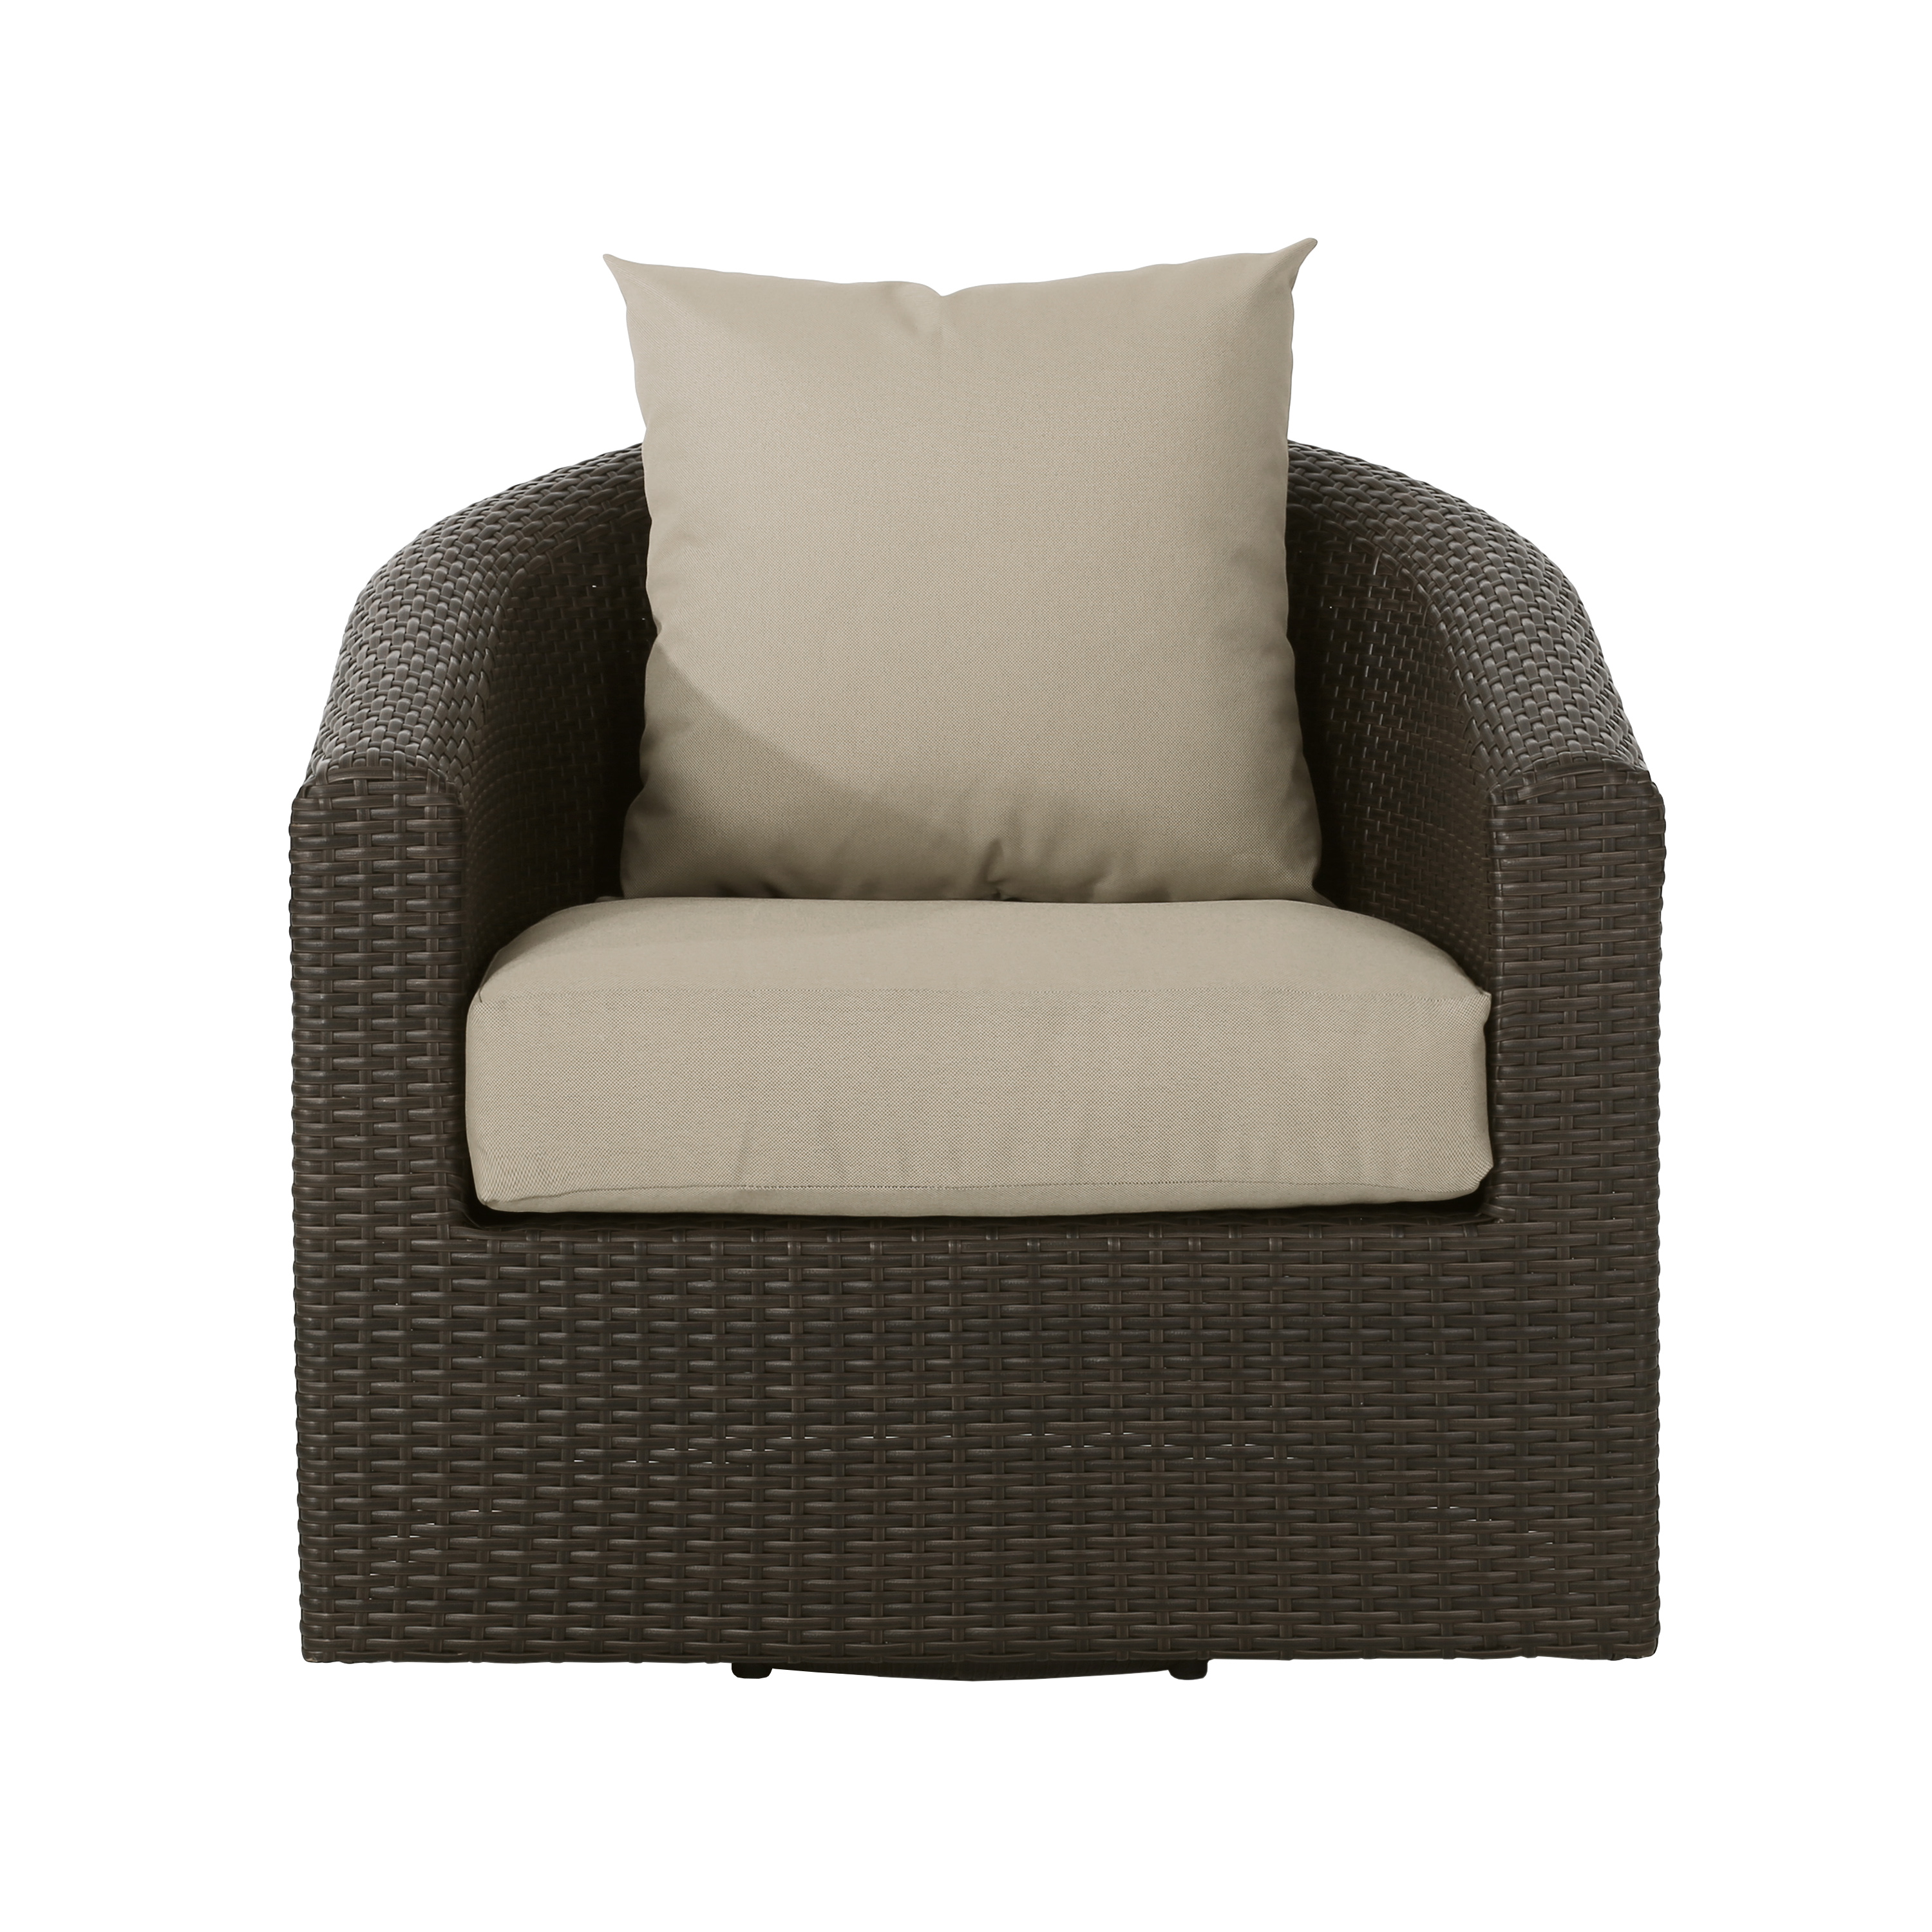 Dillard Outdoor Aluminum Framed Wicker Swivel Club Chair, Mixed Brown and Mixed Khaki - image 1 of 13